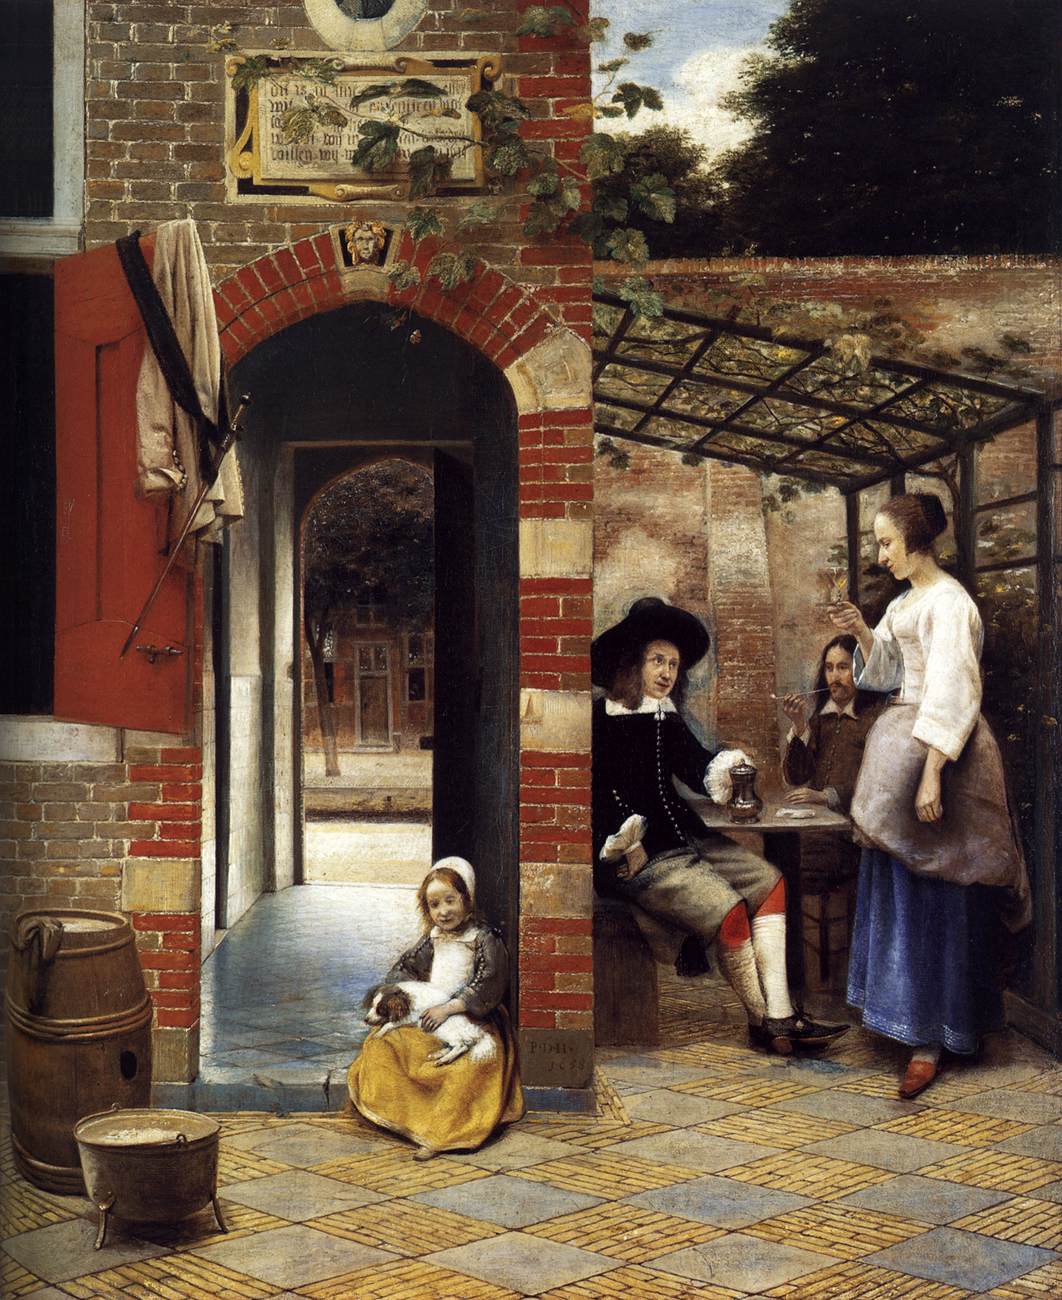 Figures Drinking in a Patio